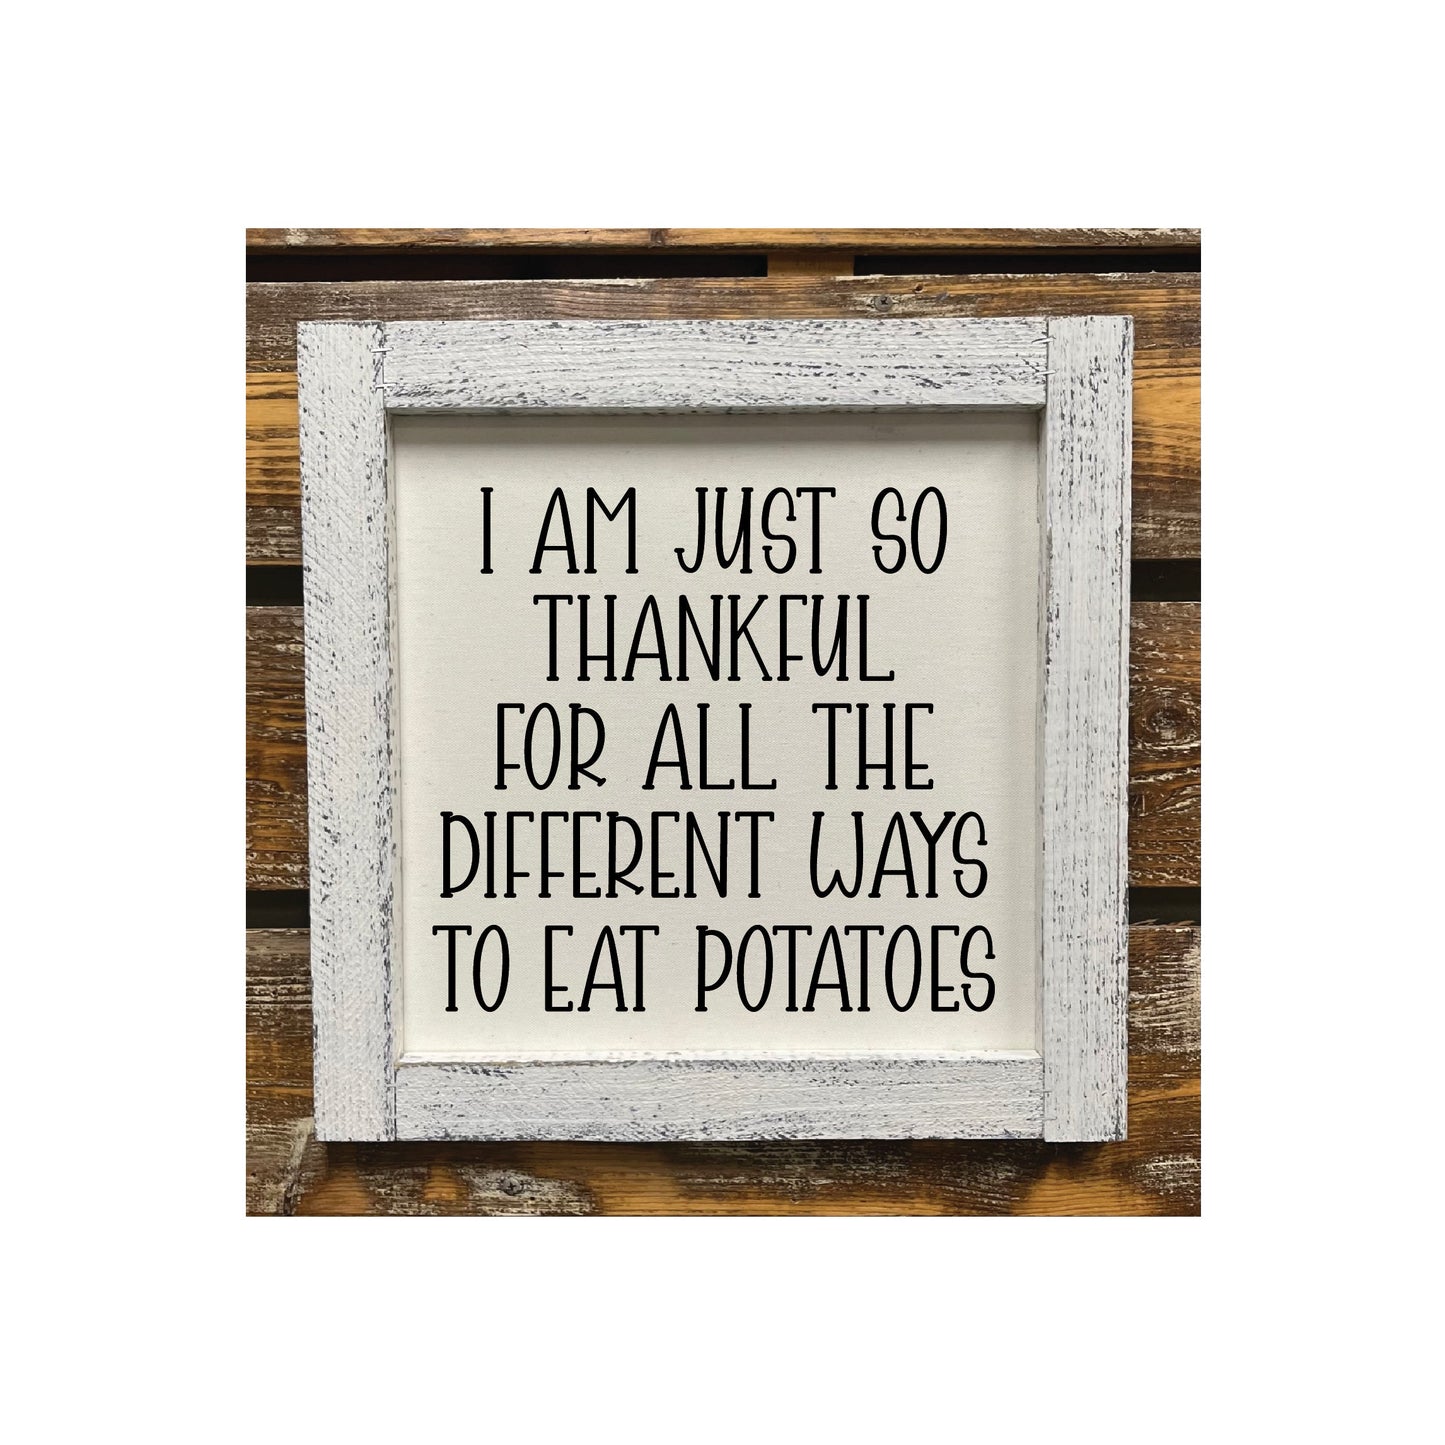 I'm So Thankful For All The Ways To ook Potatoes